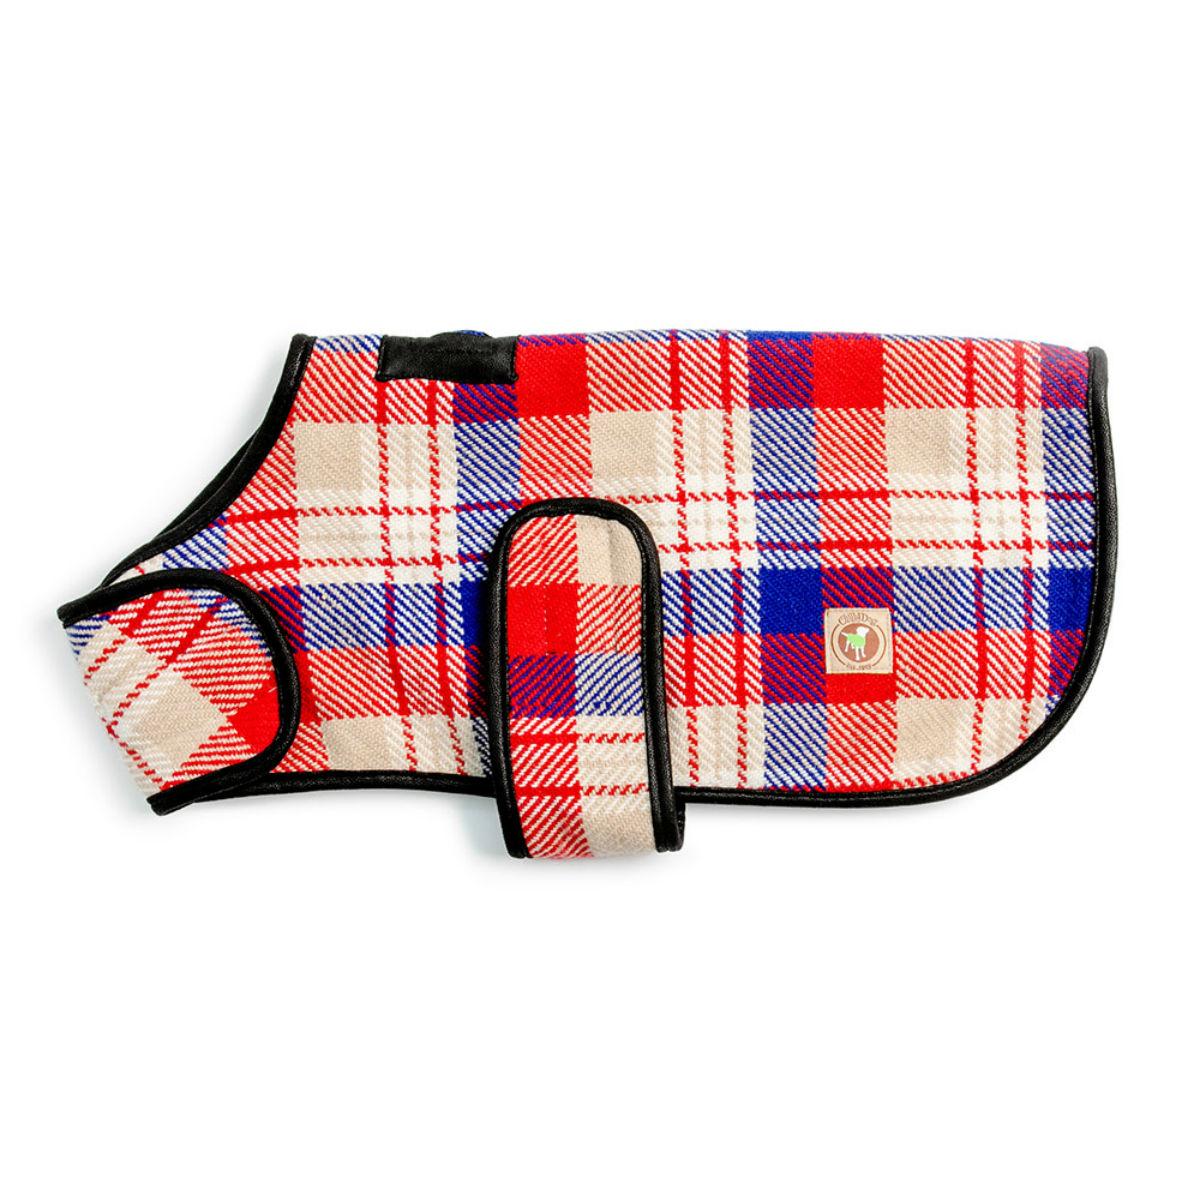 Chilly Dog Red Field Blanket Dog Coat